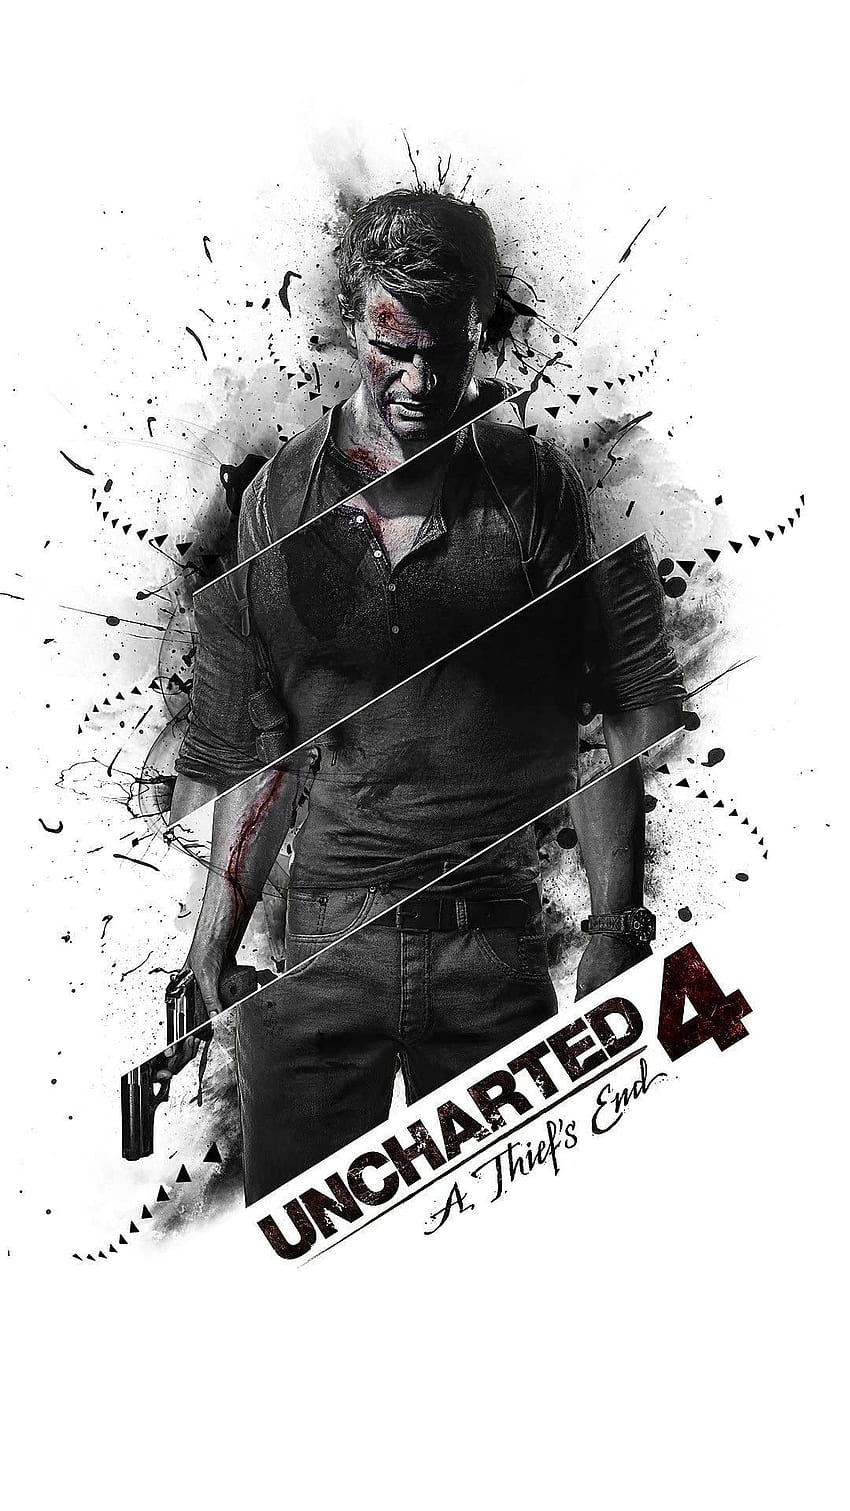 Uncharted 4 Hupages iPhone . Uncharted, Uncharted Drake, เกม Uncharted วอลล์เปเปอร์โทรศัพท์ HD